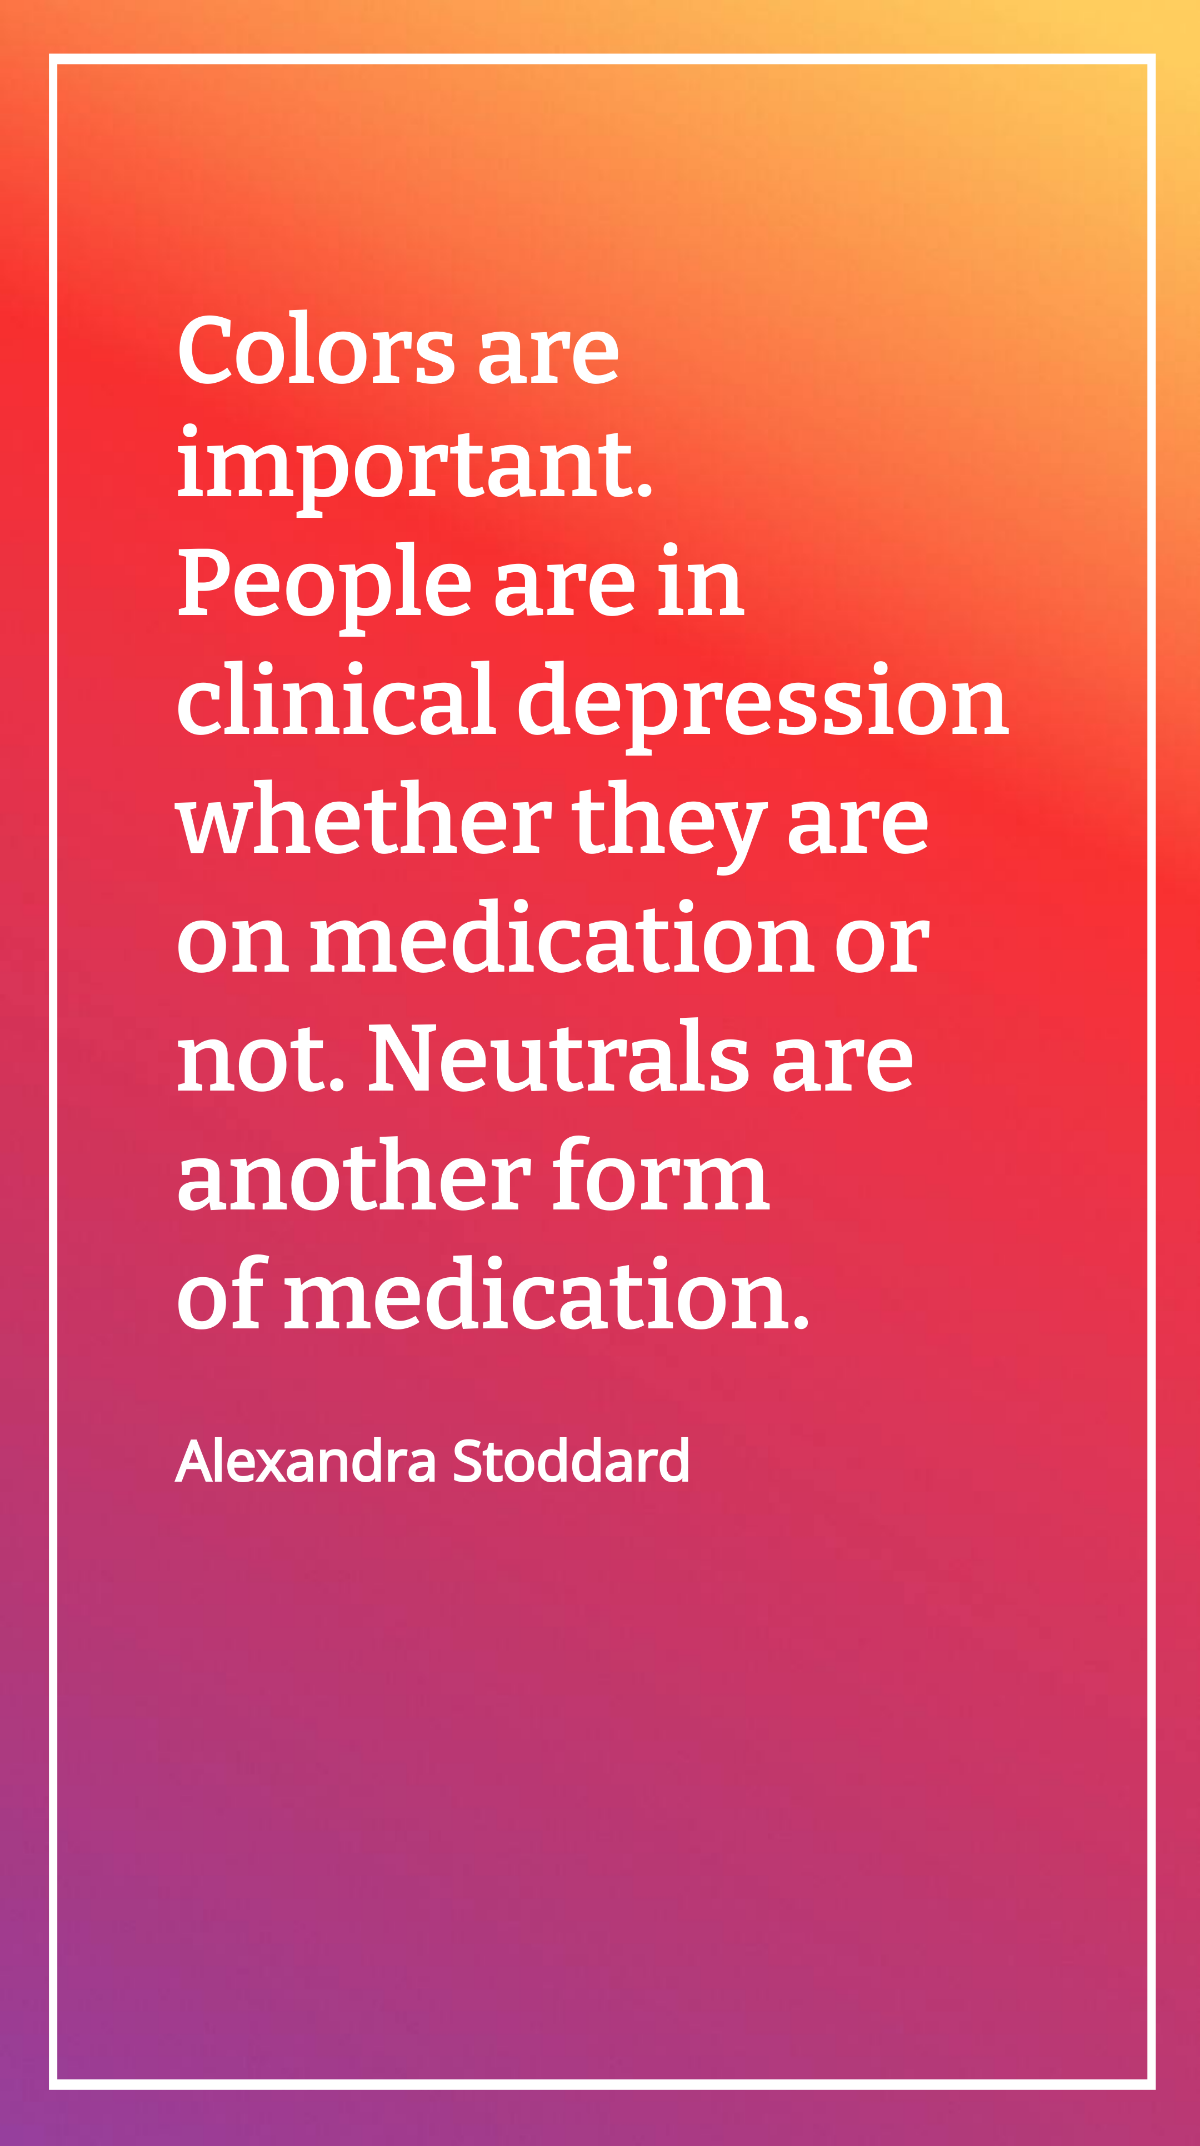 Alexandra Stoddard - Colors are important. People are in clinical depression whether they are on medication or not. Neutrals are another form of medication. Template